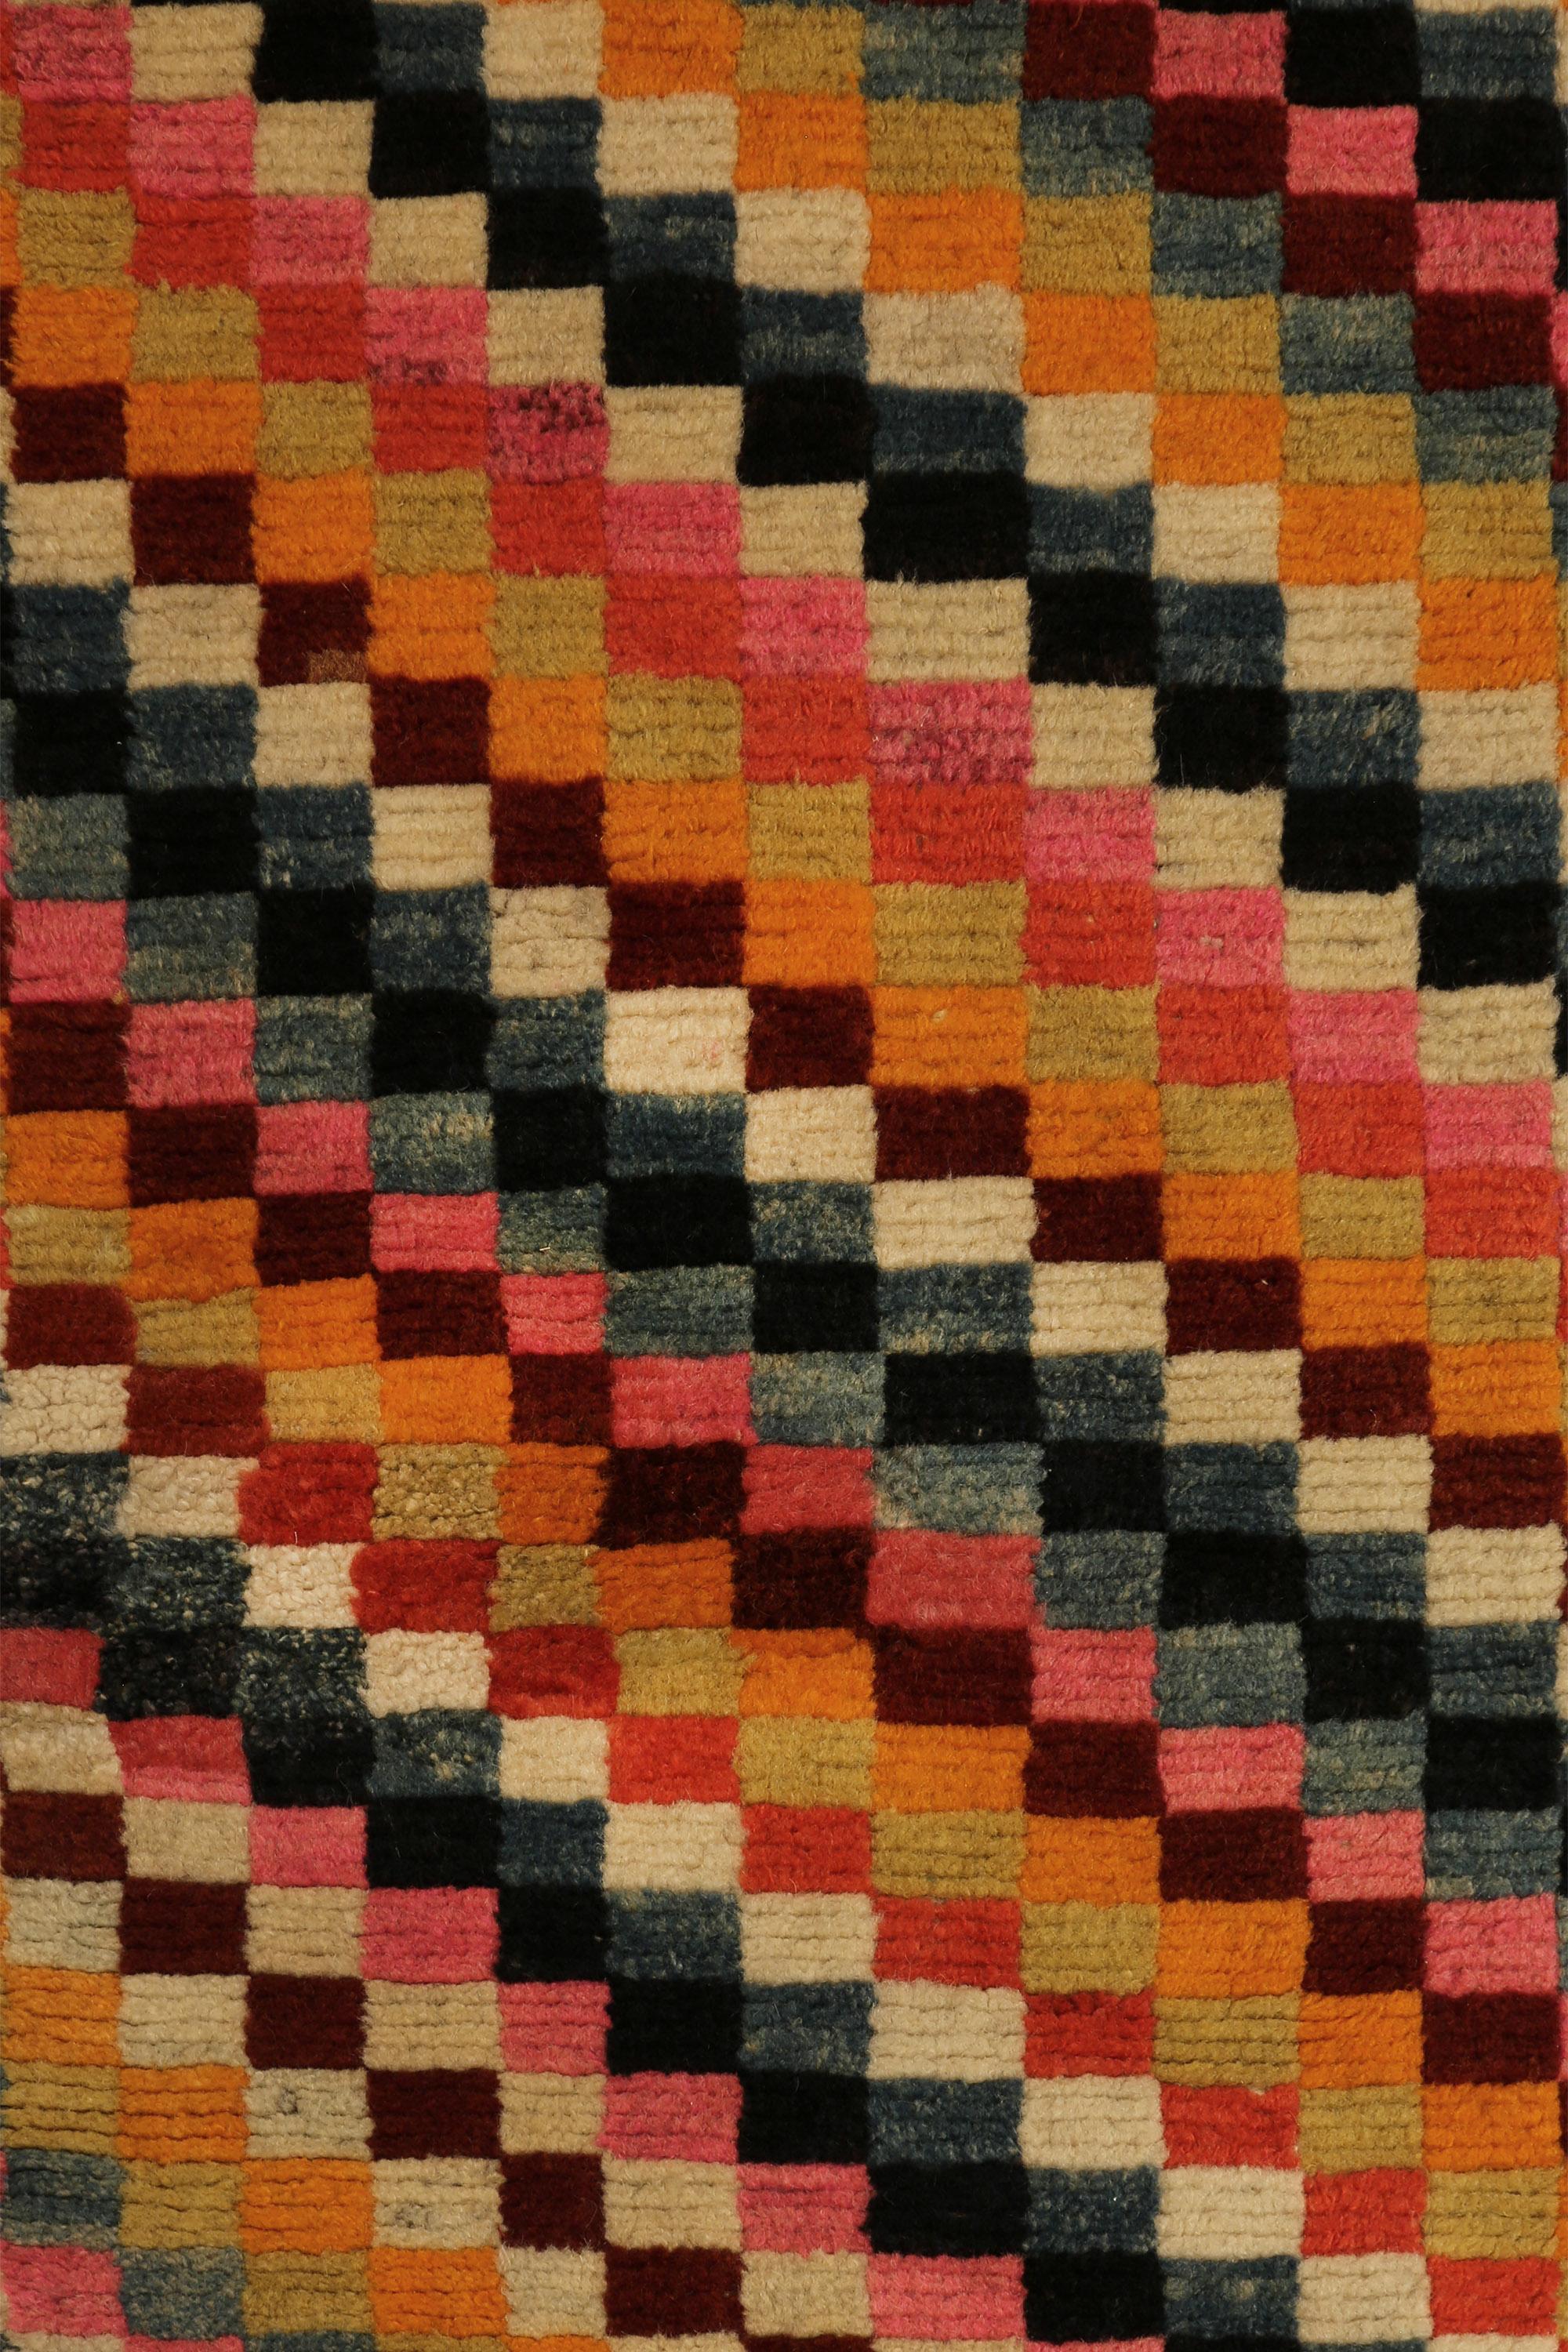 Geometric sleeping carpet, Khaden
This monastic sleeping carpet composed of multicolored checkers evokes joy and serenity. This composition refers to silk patchwork geometric altar cloths that were common in Tibet and used by monks and